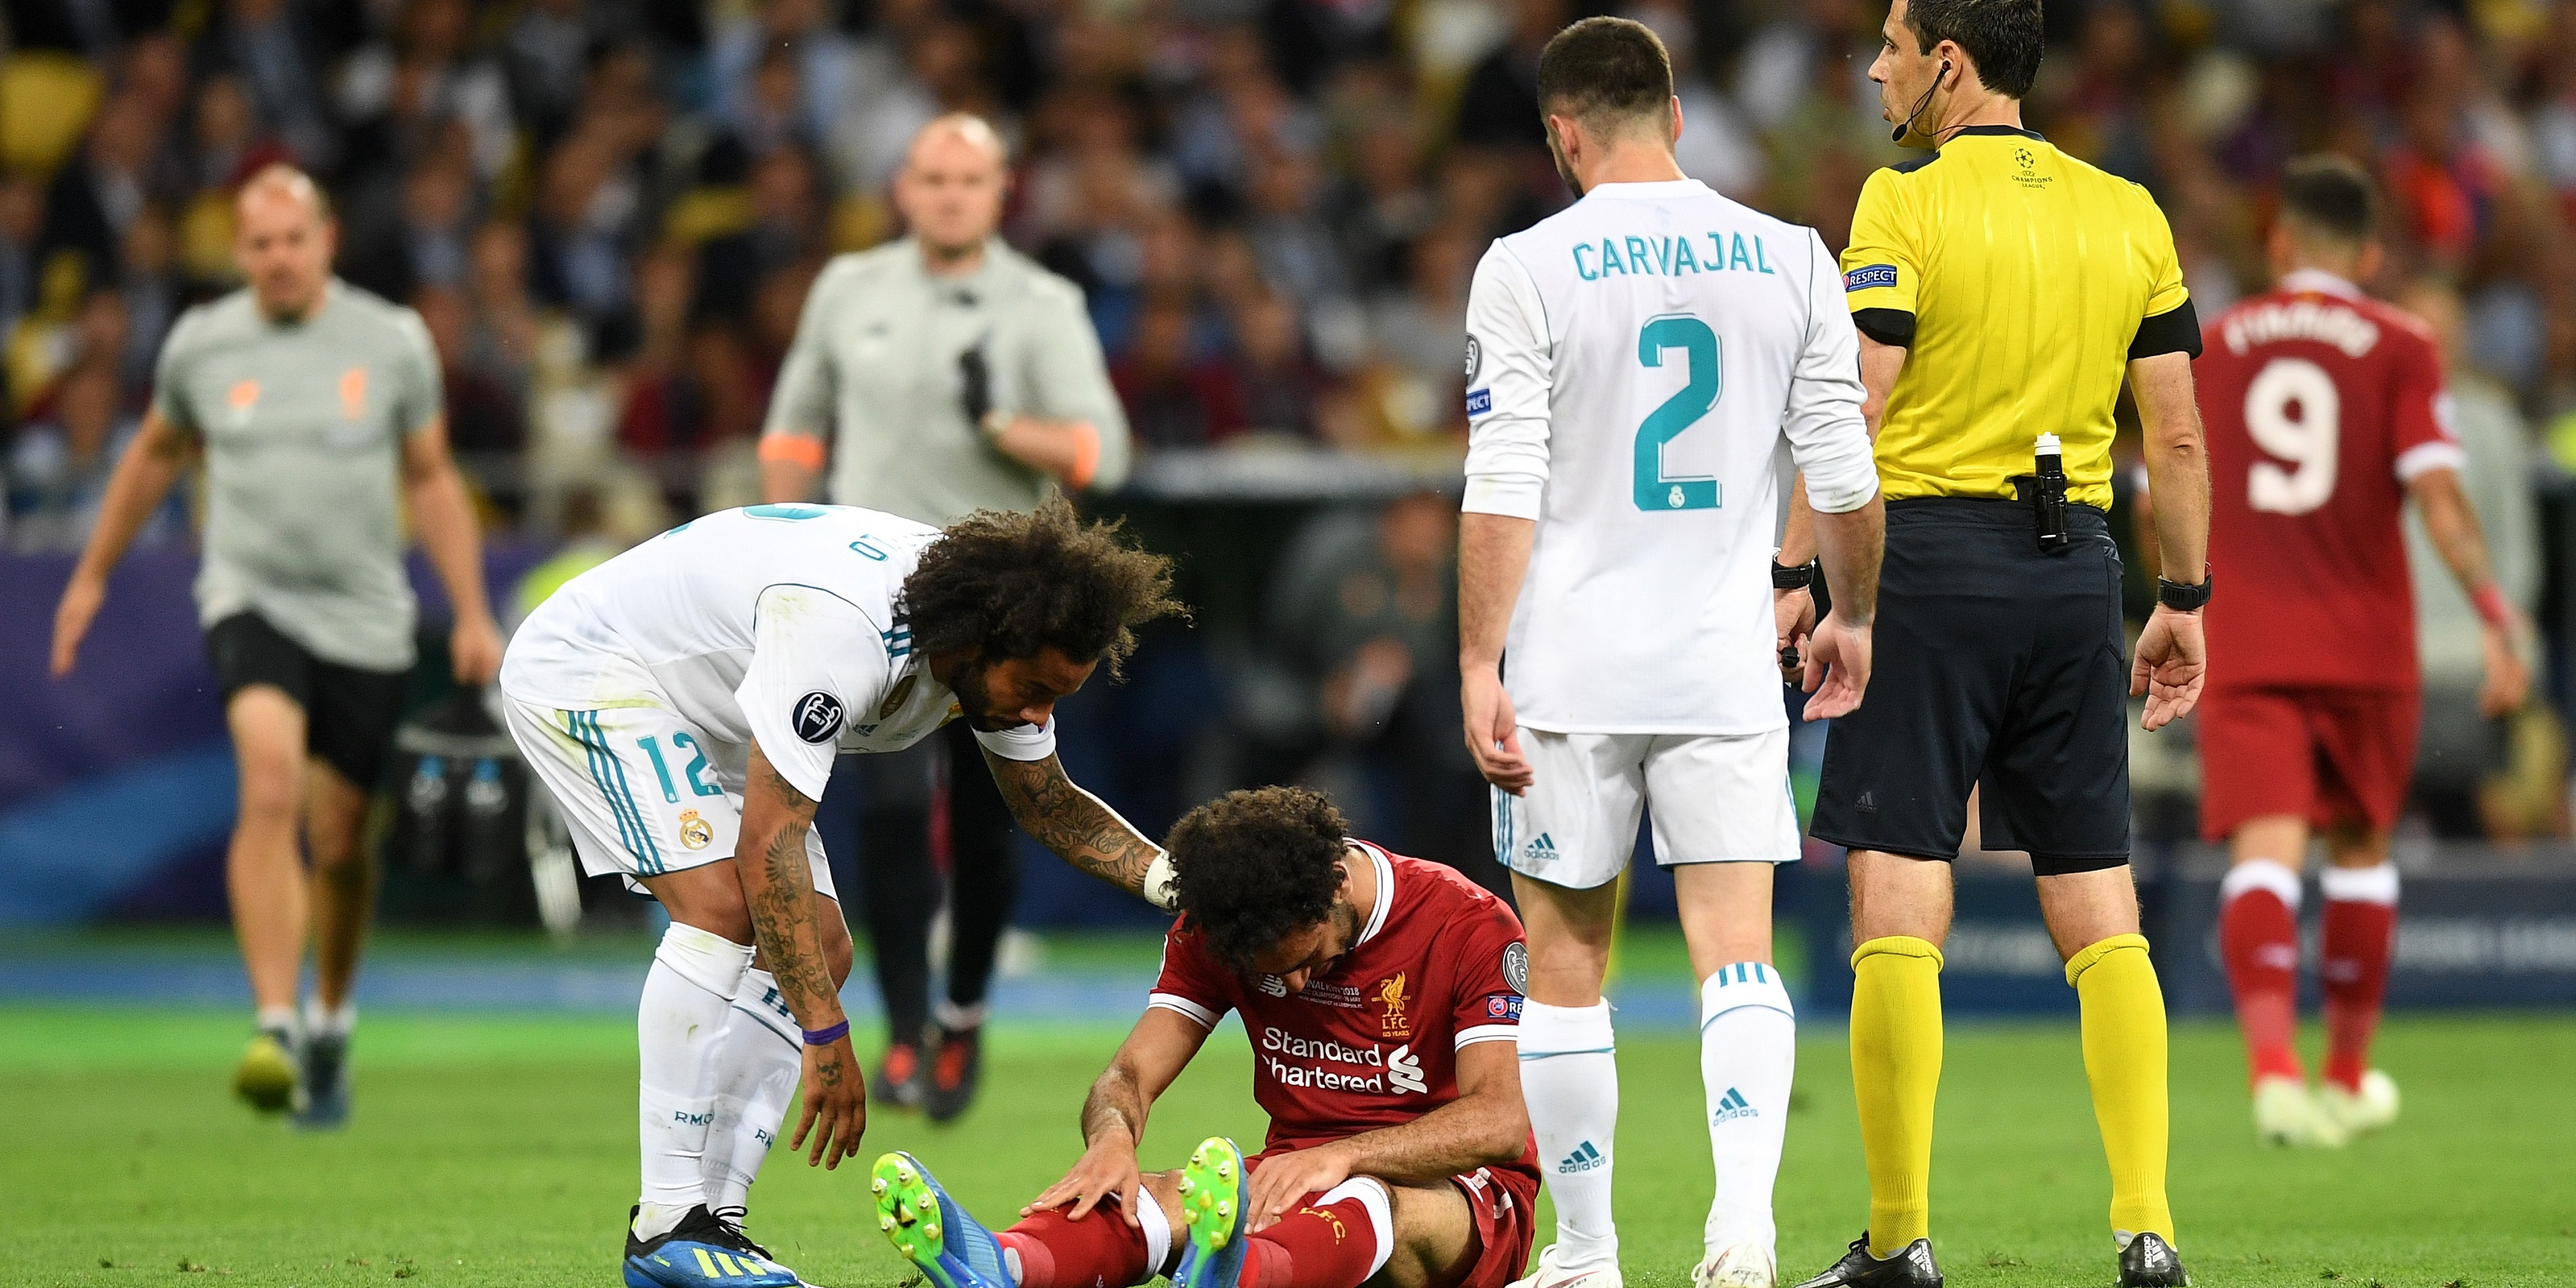 Klopp’s CL final team talk is done & dusted after second display of arrogance from Real Madrid in response to Salah comments – Opinion